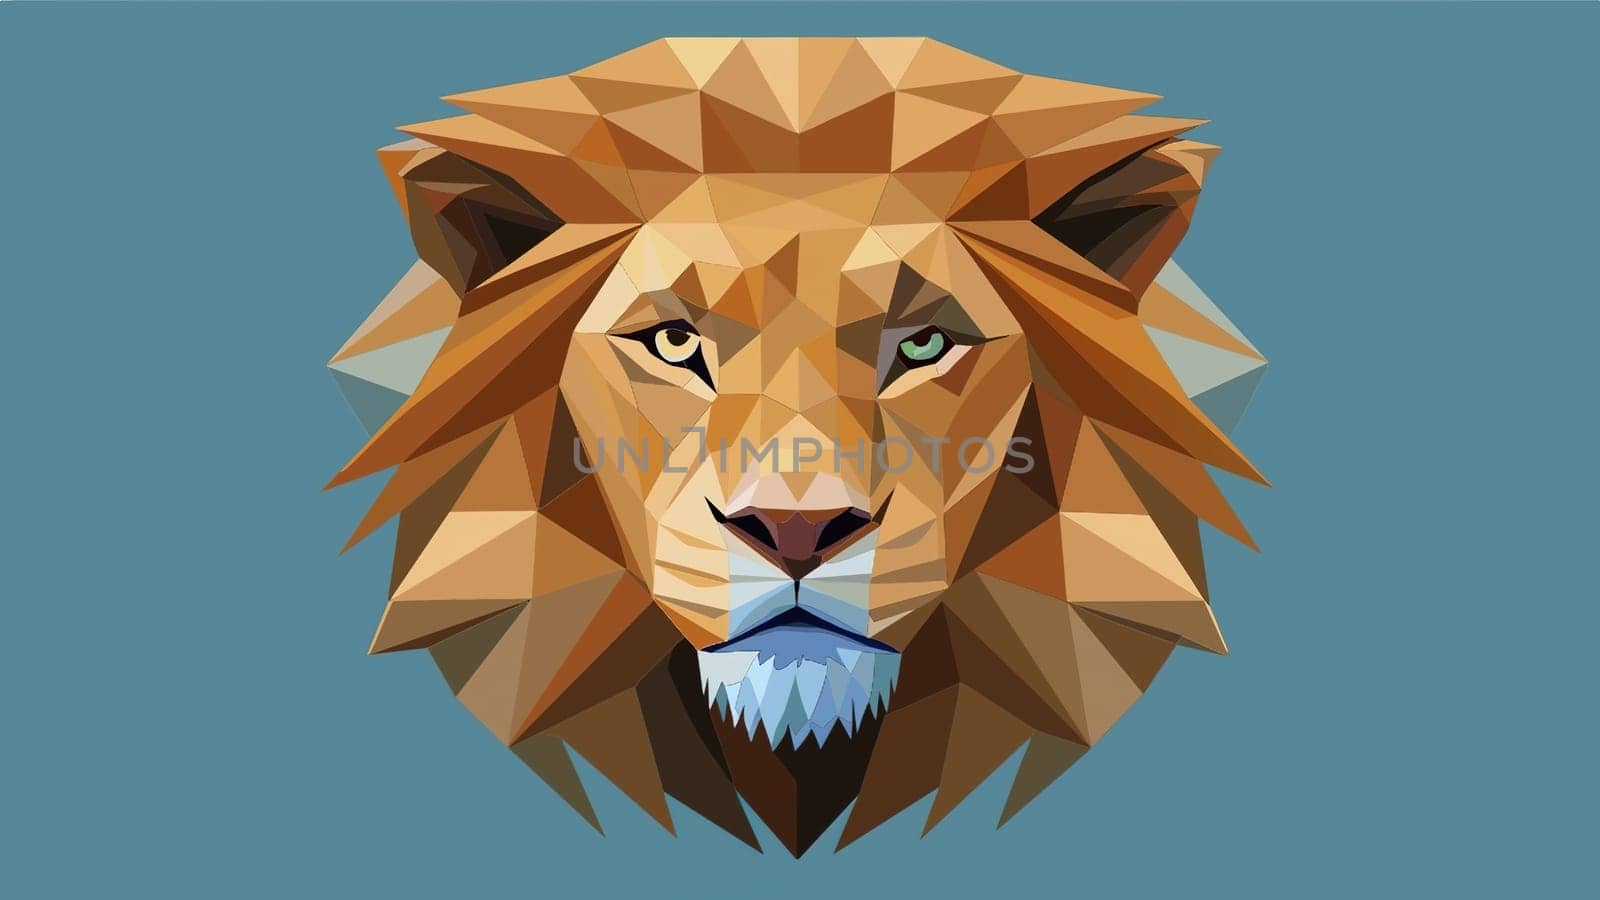 Lion head low poly style vector illustration. Polygonal animal.Low poly portrait of a lion in low poly style.Lion head polygonal vector illustration.